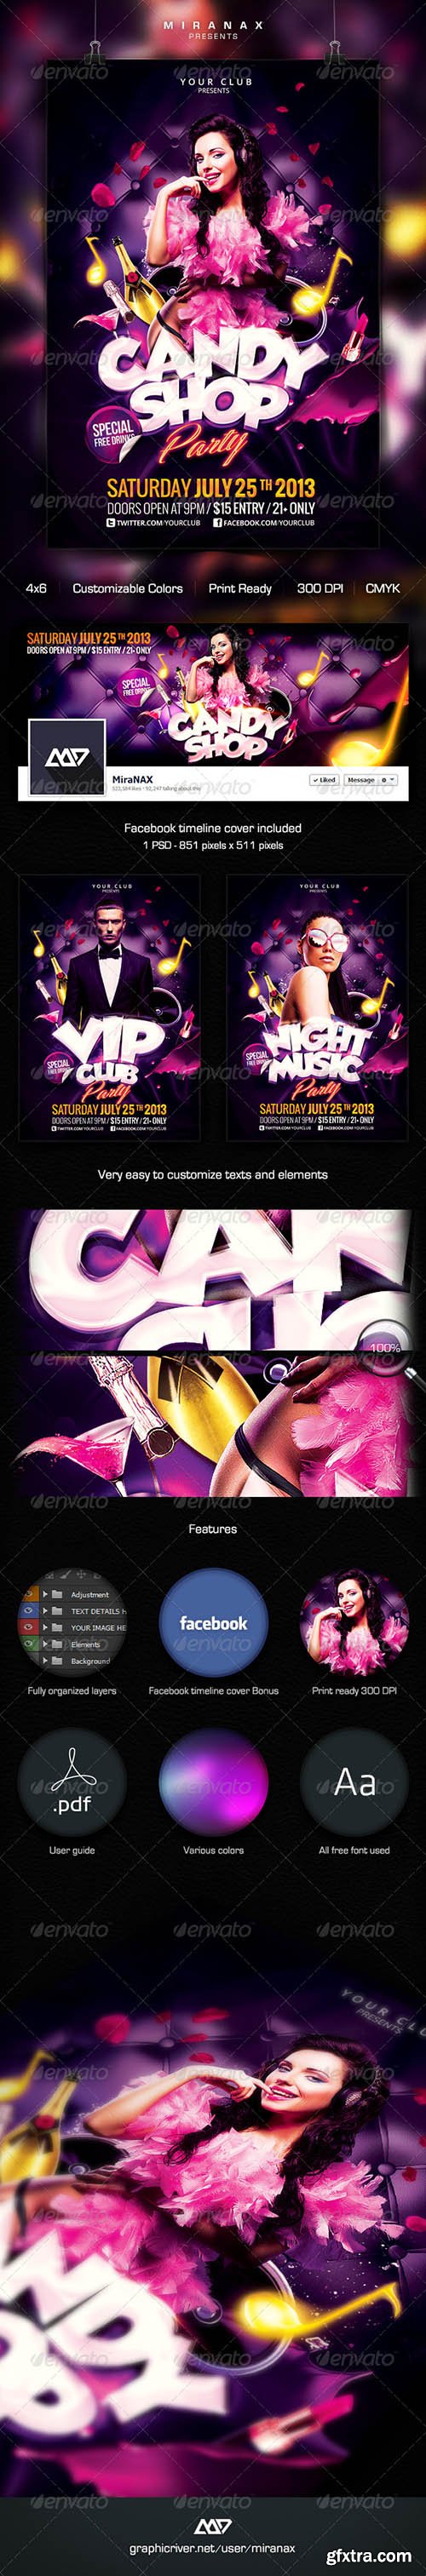 Graphicriver Girl Night / Candy Shop Party Flyer 4521794